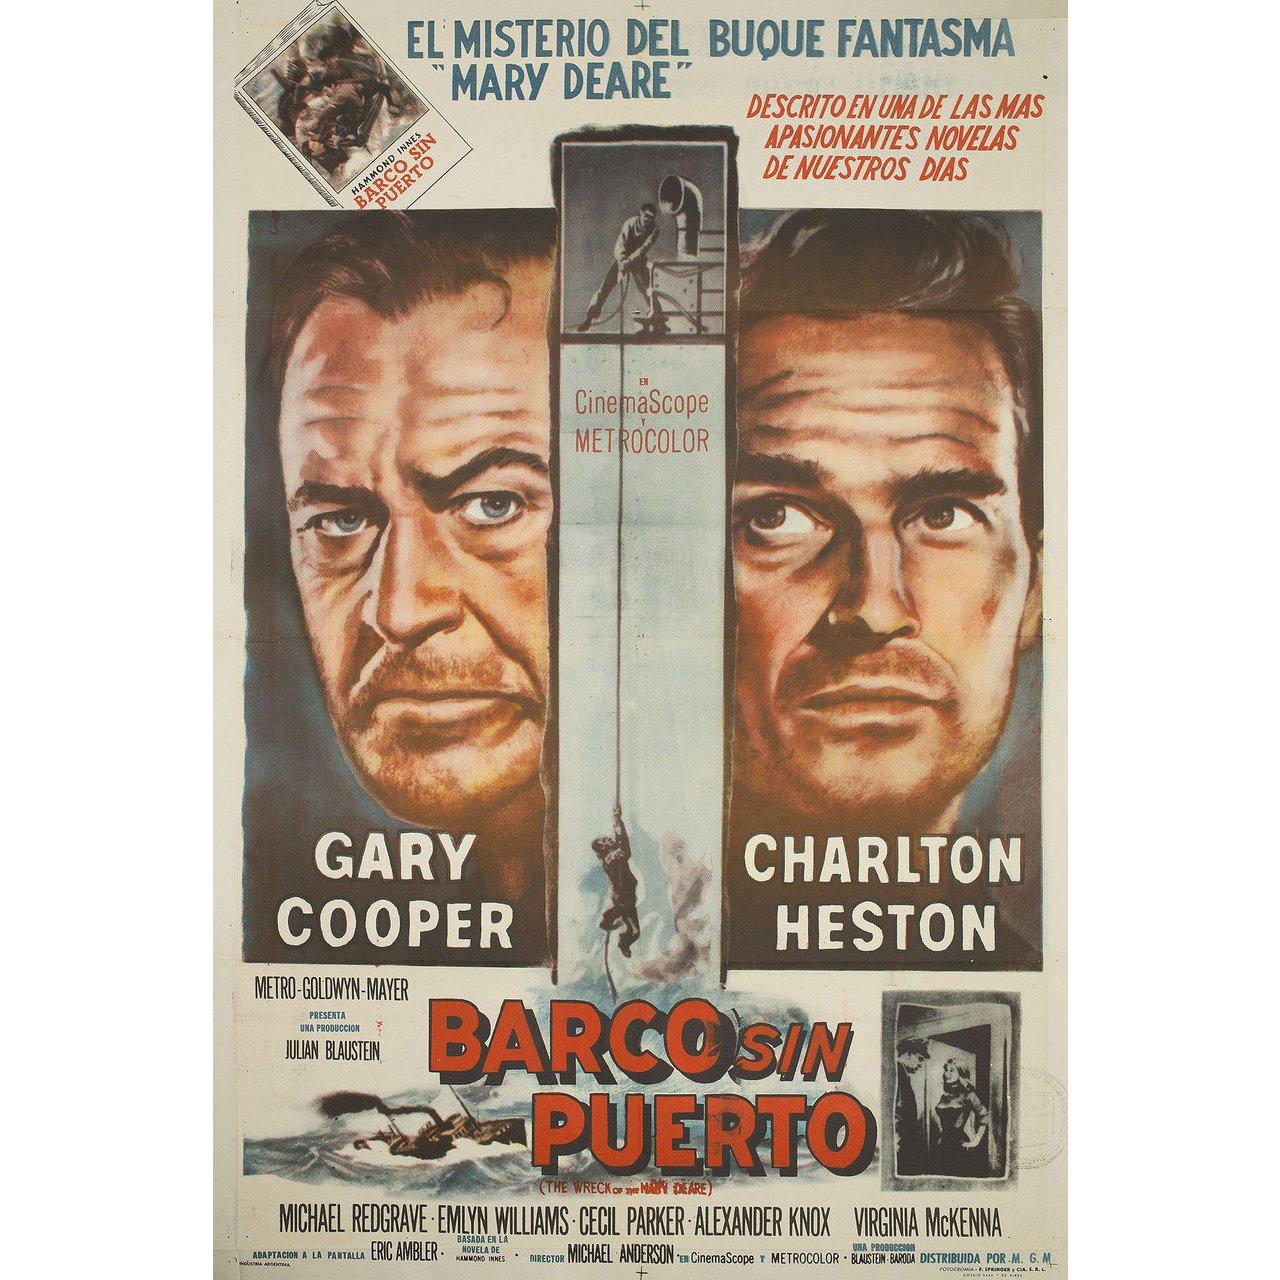 Original 1959 Argentine poster by Reynold Brown for the film The Wreck of the Mary Deare directed by Michael Anderson with Gary Cooper / Charlton Heston / Michael Redgrave / Emlyn Williams. Very good condition, folded. Many original posters were